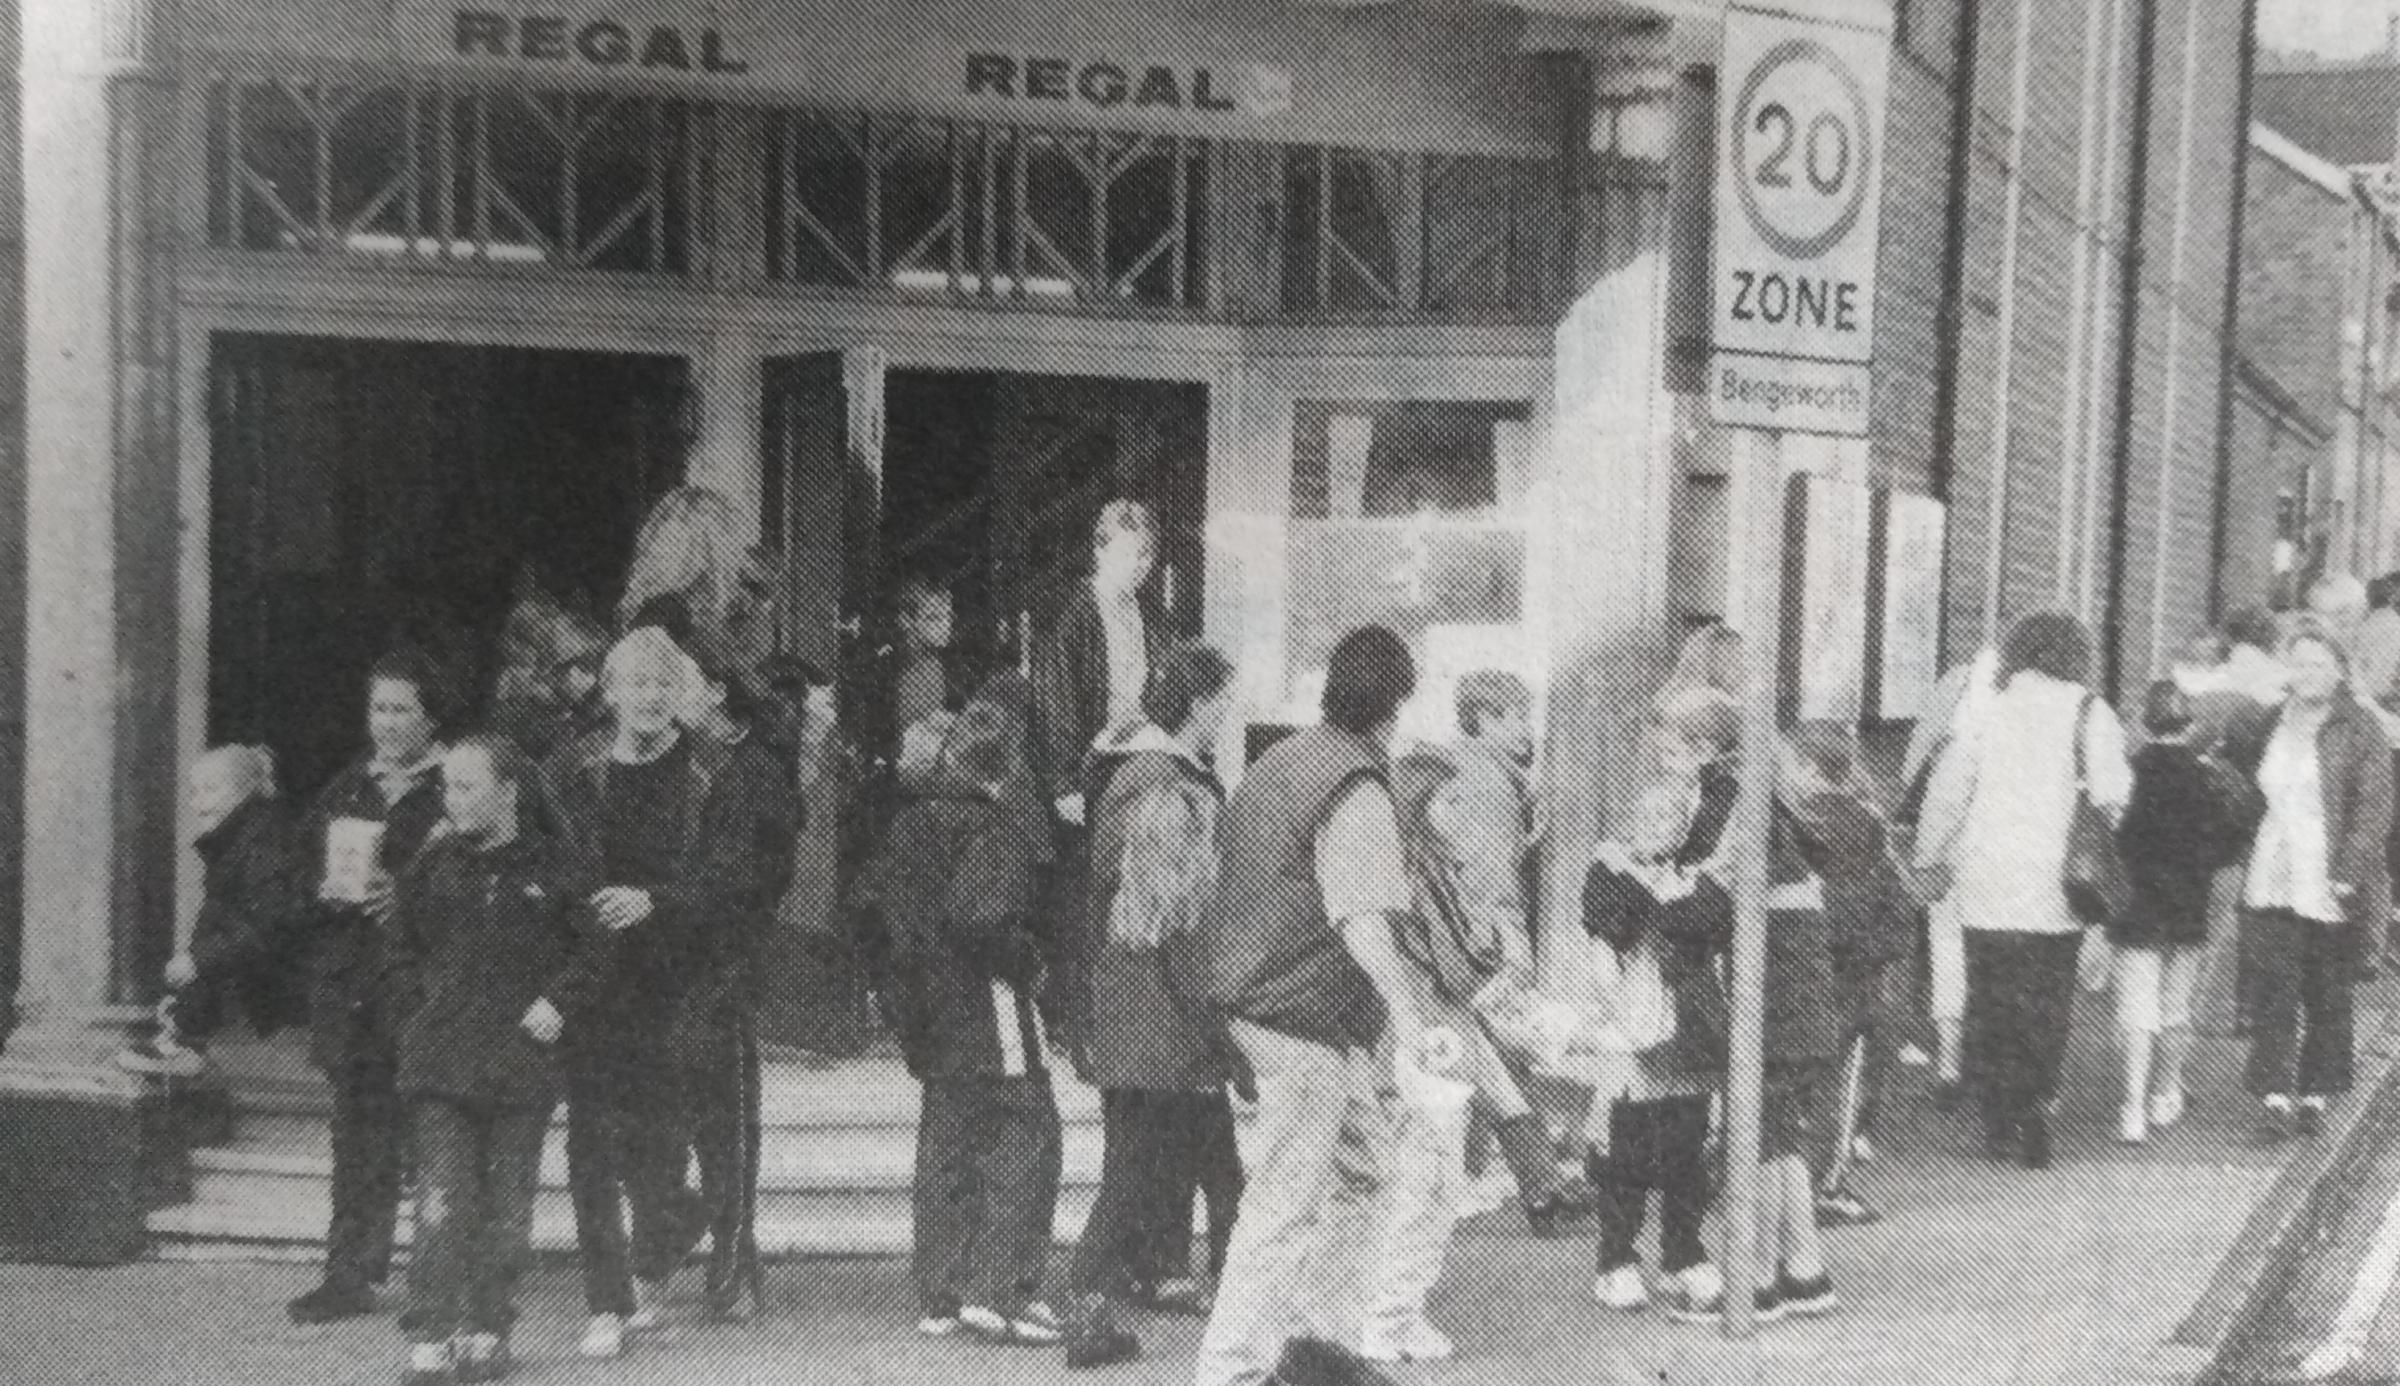 Cinemagoers pour out of the Regal after a film in the late 90s 